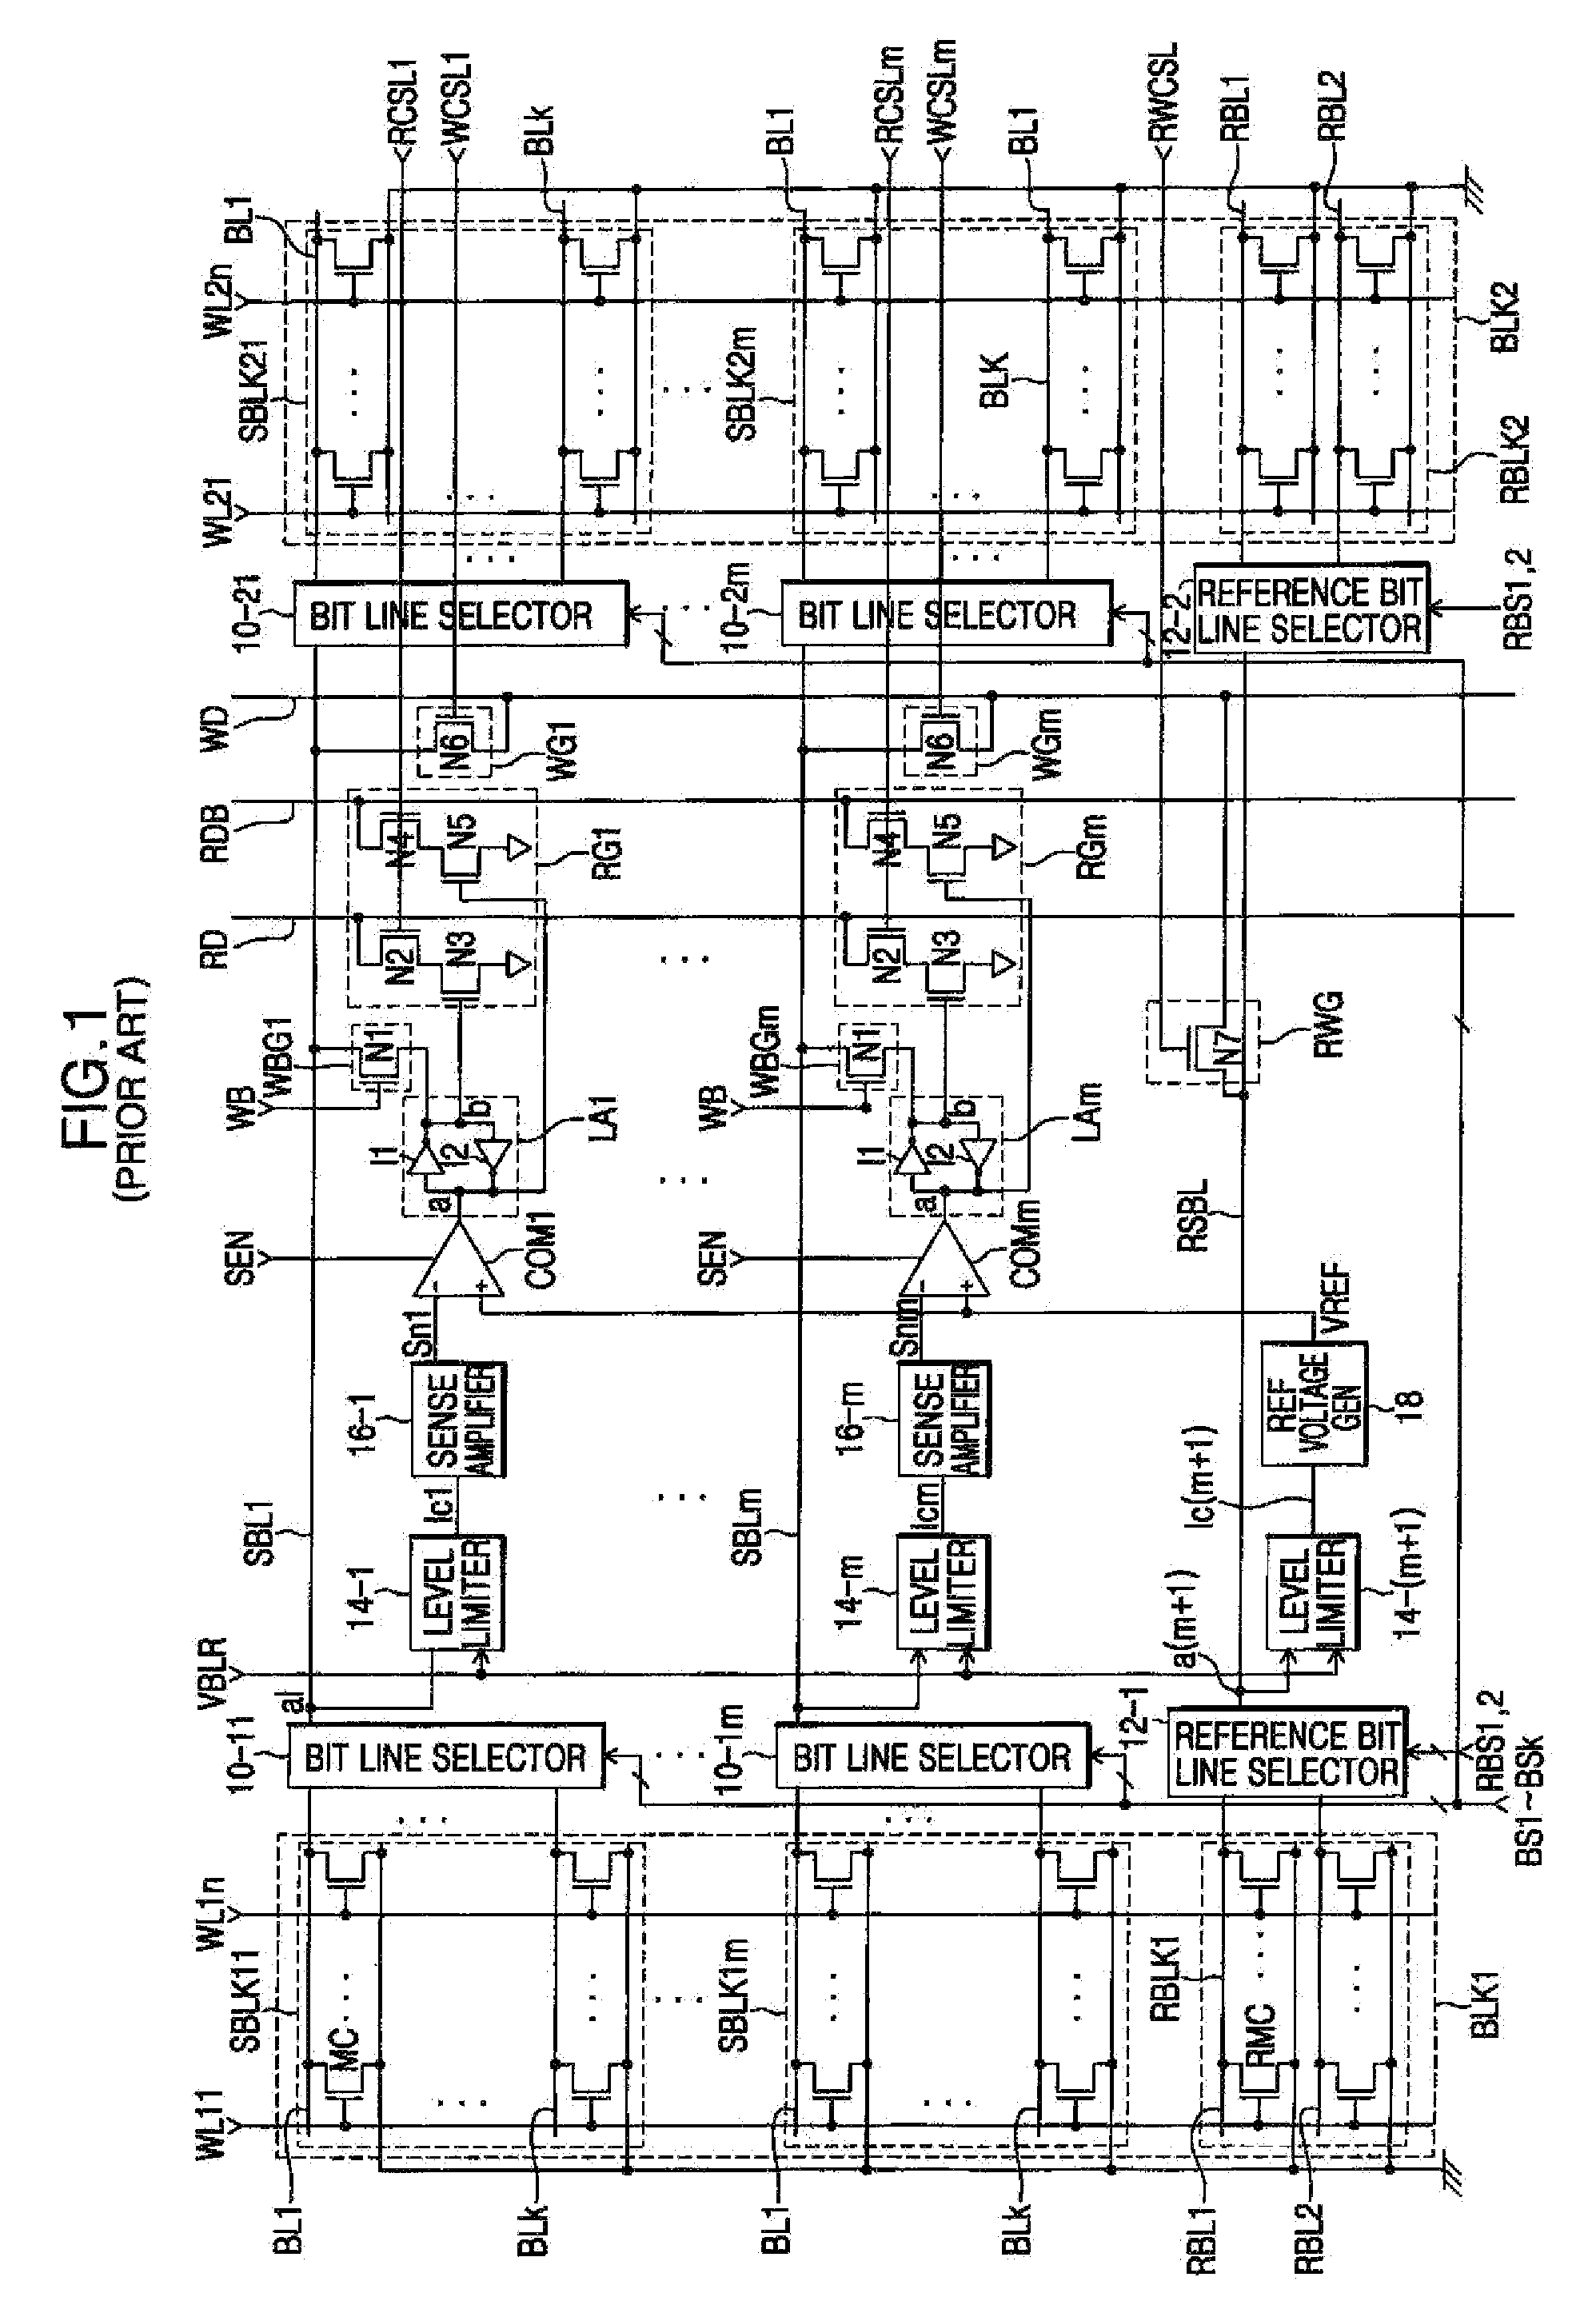 Semiconductor memory device including floating body memory cells and method of operating the same